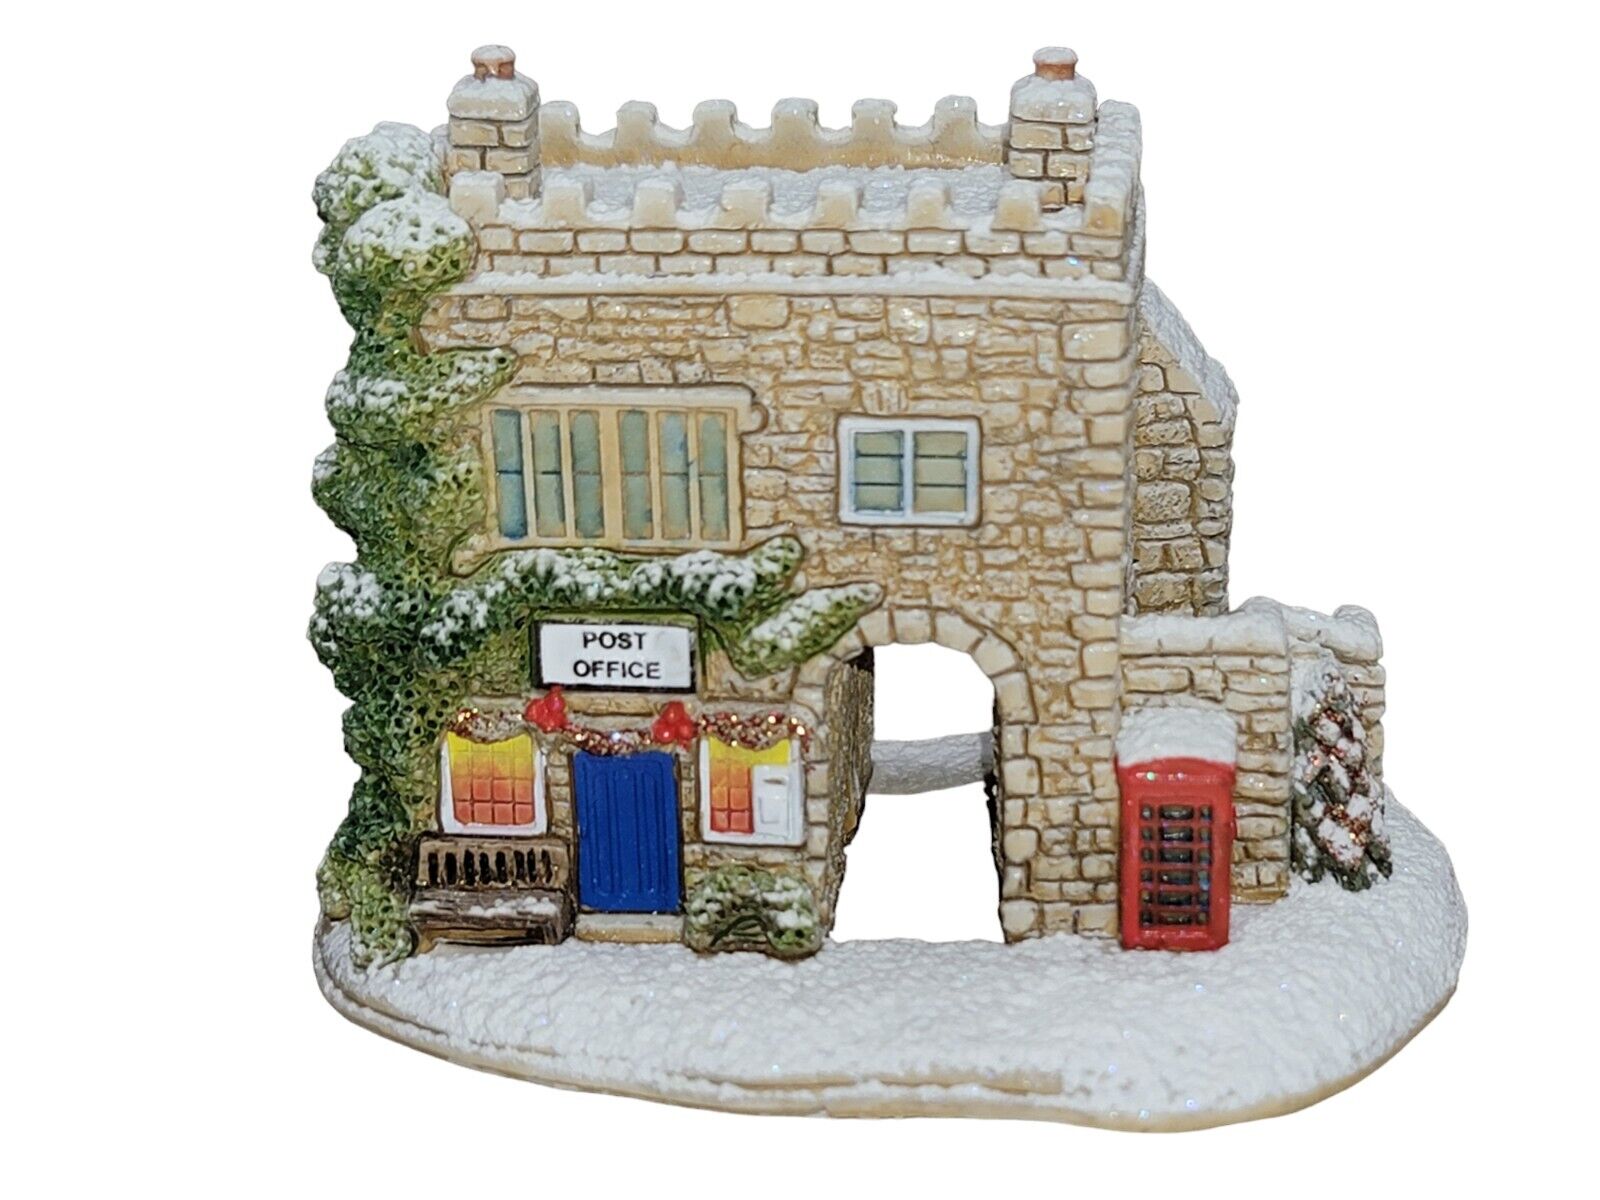 2013 Lilliput Lane Blanchland Post Office Cottage W/deeds and Box L3599 Handmade